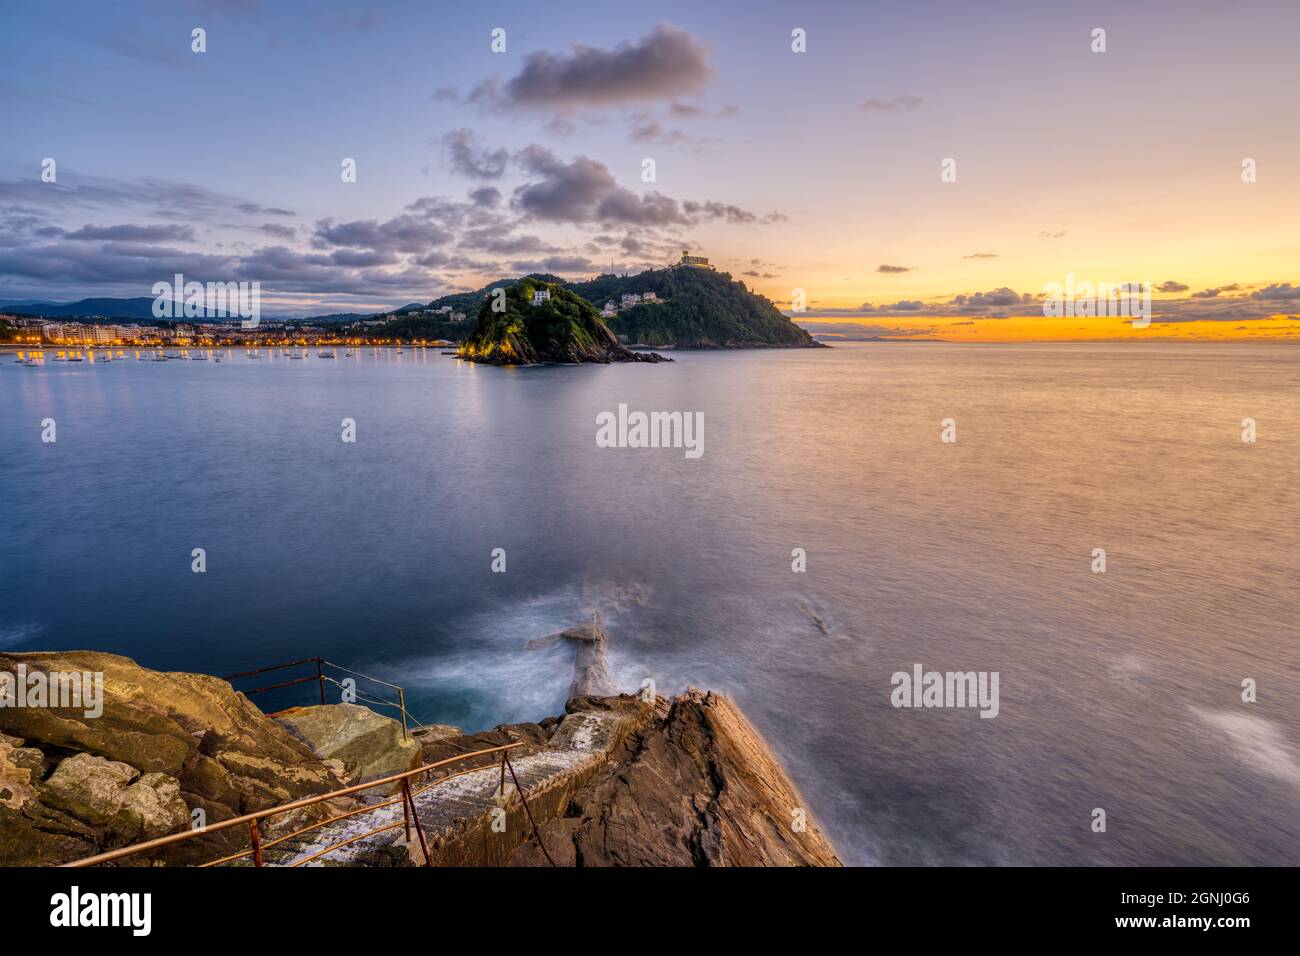 The bay of San Sebastian in Spain with Monte Igueldo at sunset Stock Photo